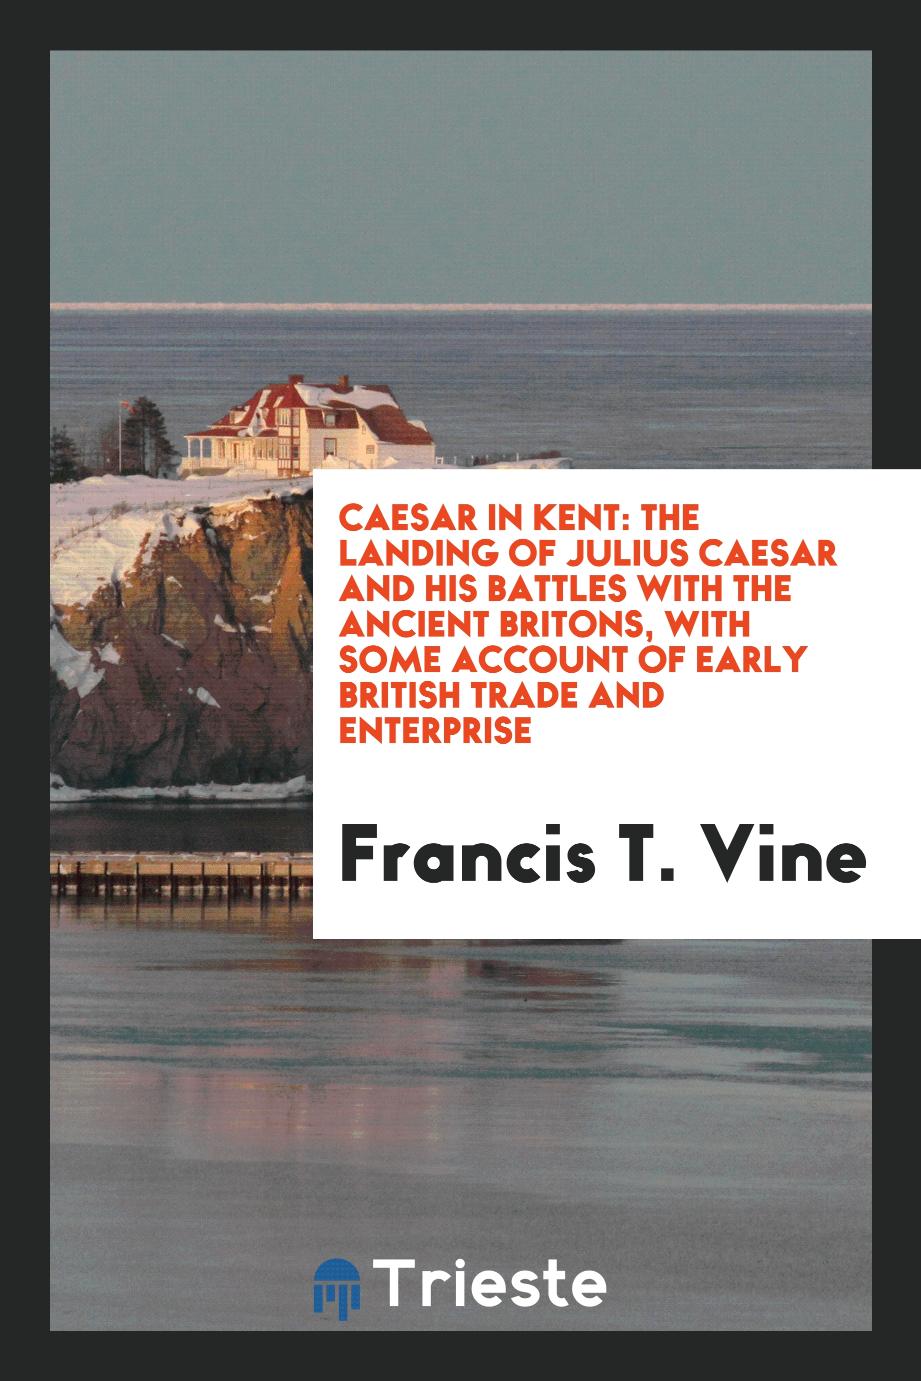 Caesar in Kent: The Landing of Julius Caesar and His Battles with the Ancient Britons, with Some Account of Early British Trade and Enterprise